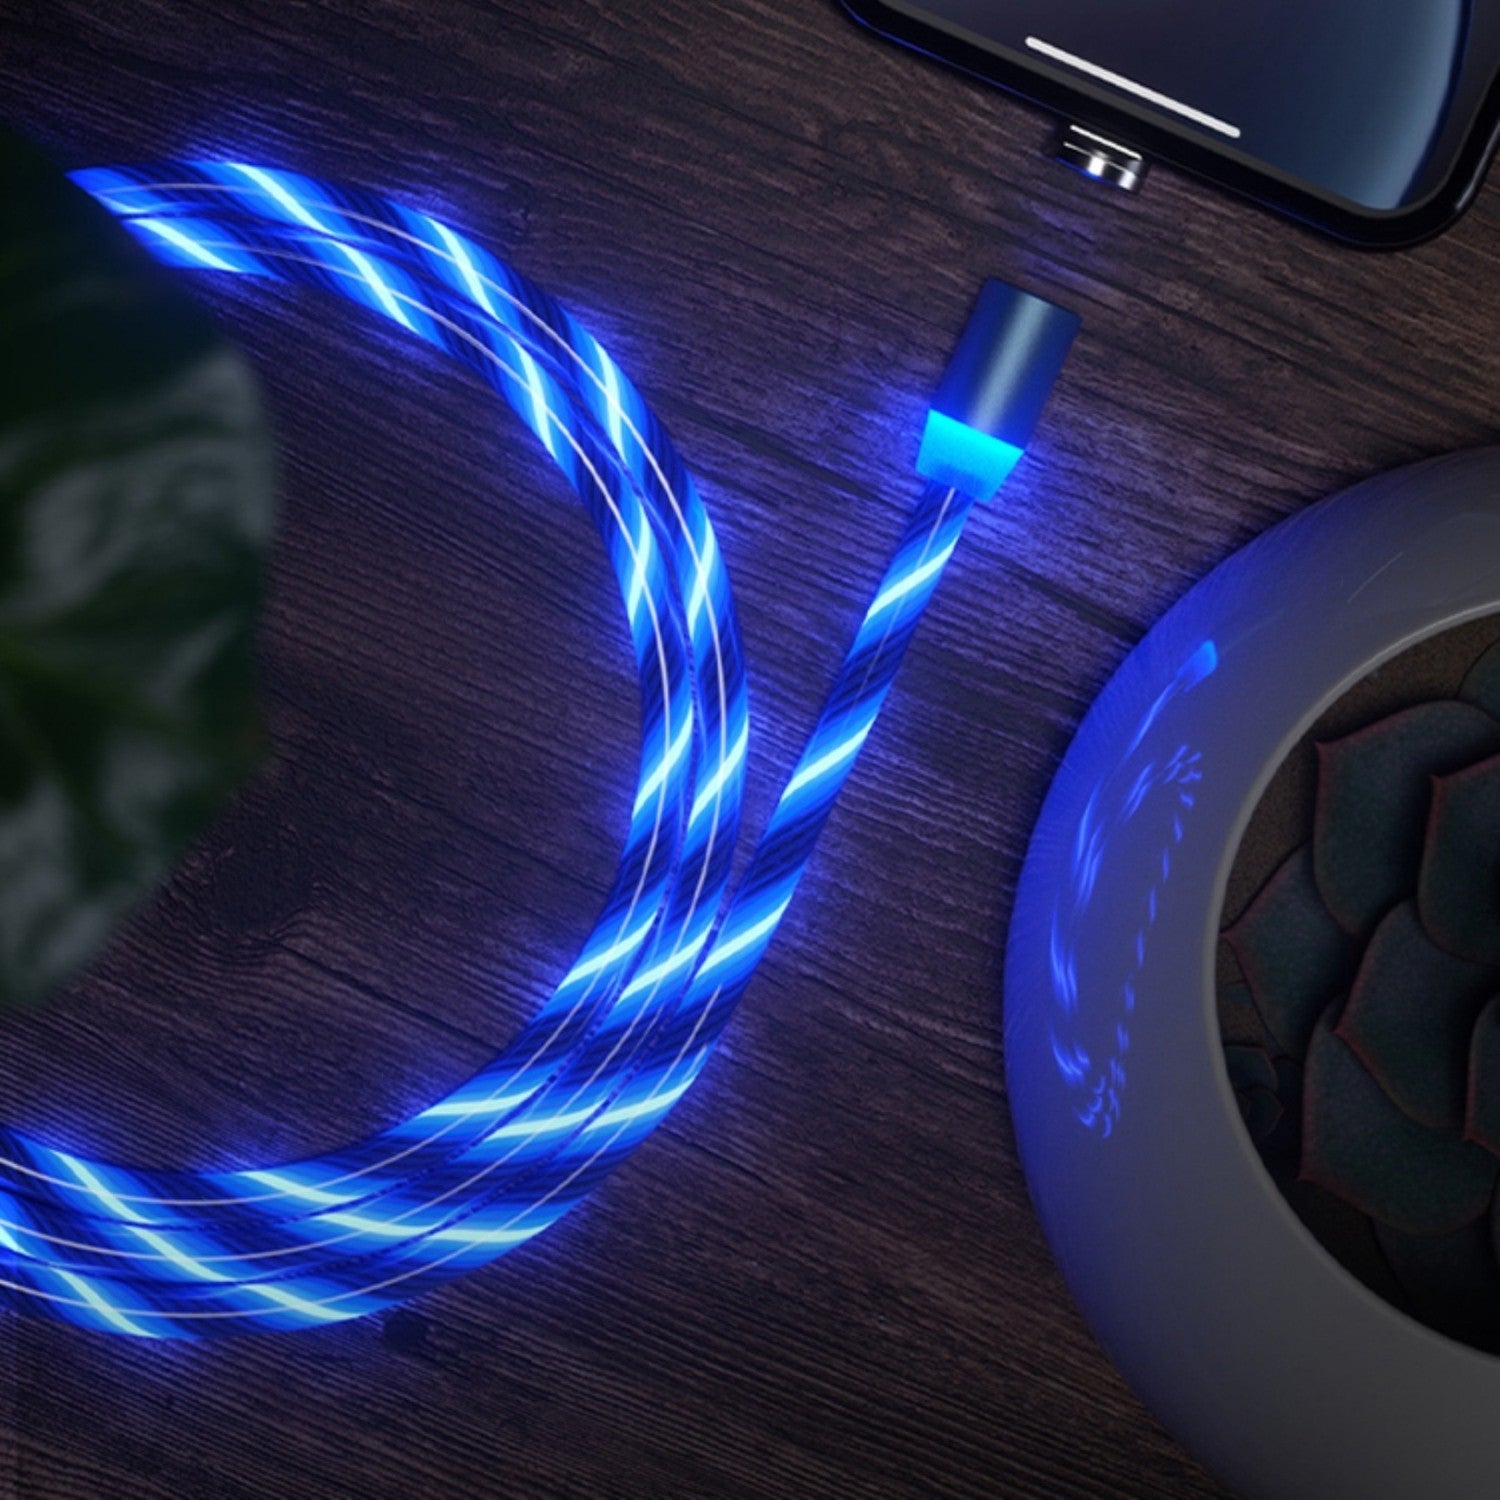 Blue Magnetic LED Phone Charger Near Plants